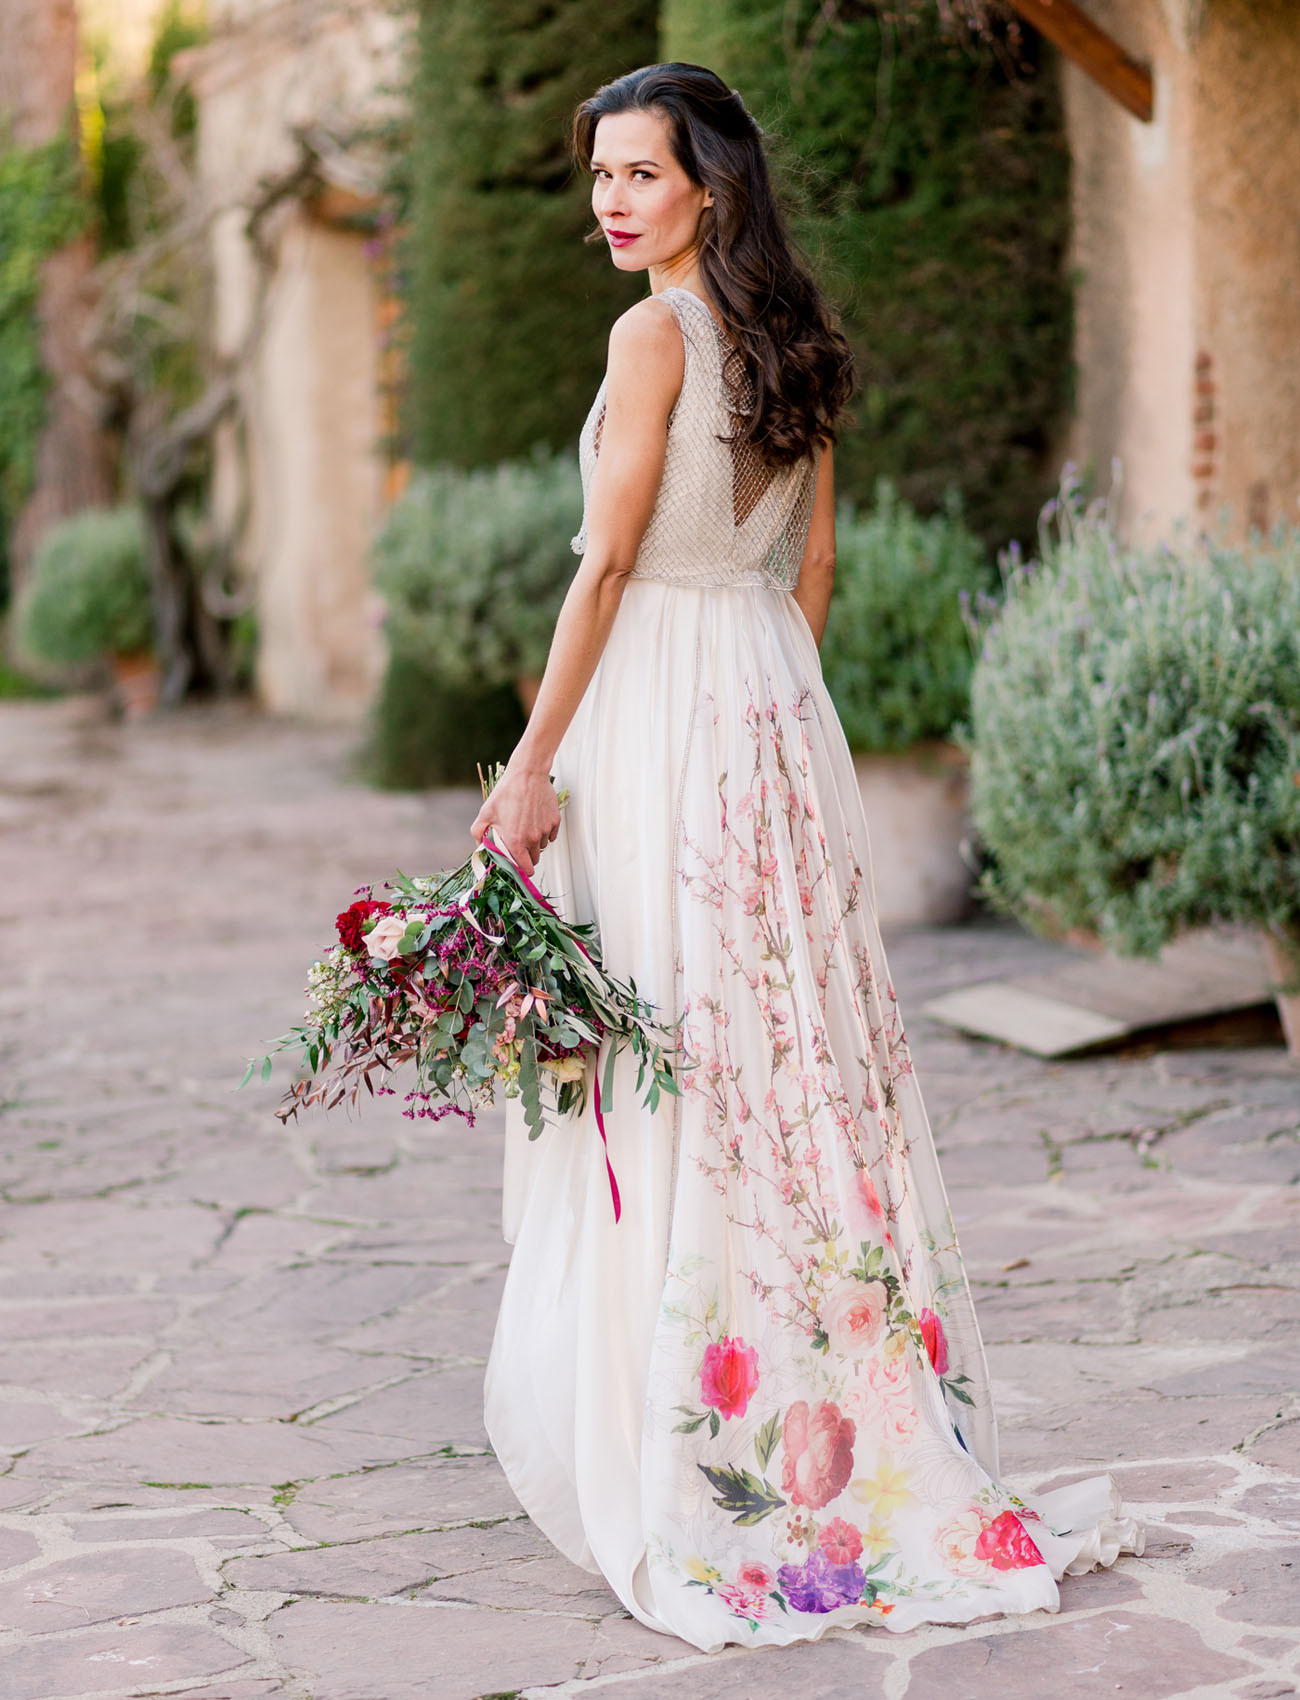 Flower Wedding Dresses
 Bold Romantic Barcelona Wedding Reception with a Floral